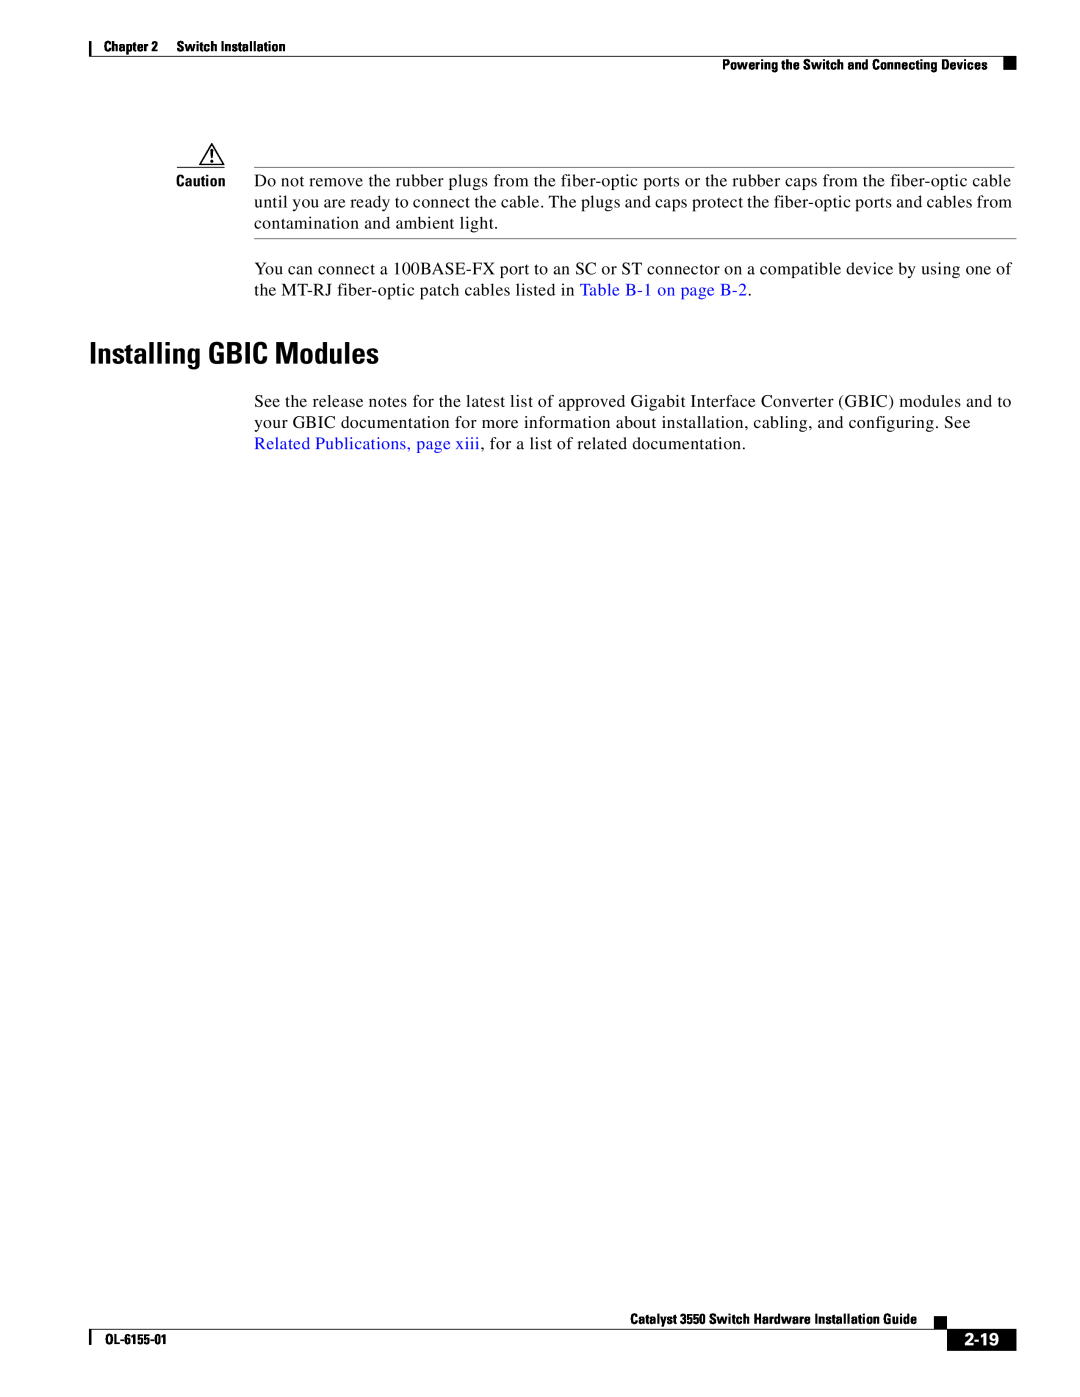 Cisco Systems 3550 manual Installing GBIC Modules, 2-19 